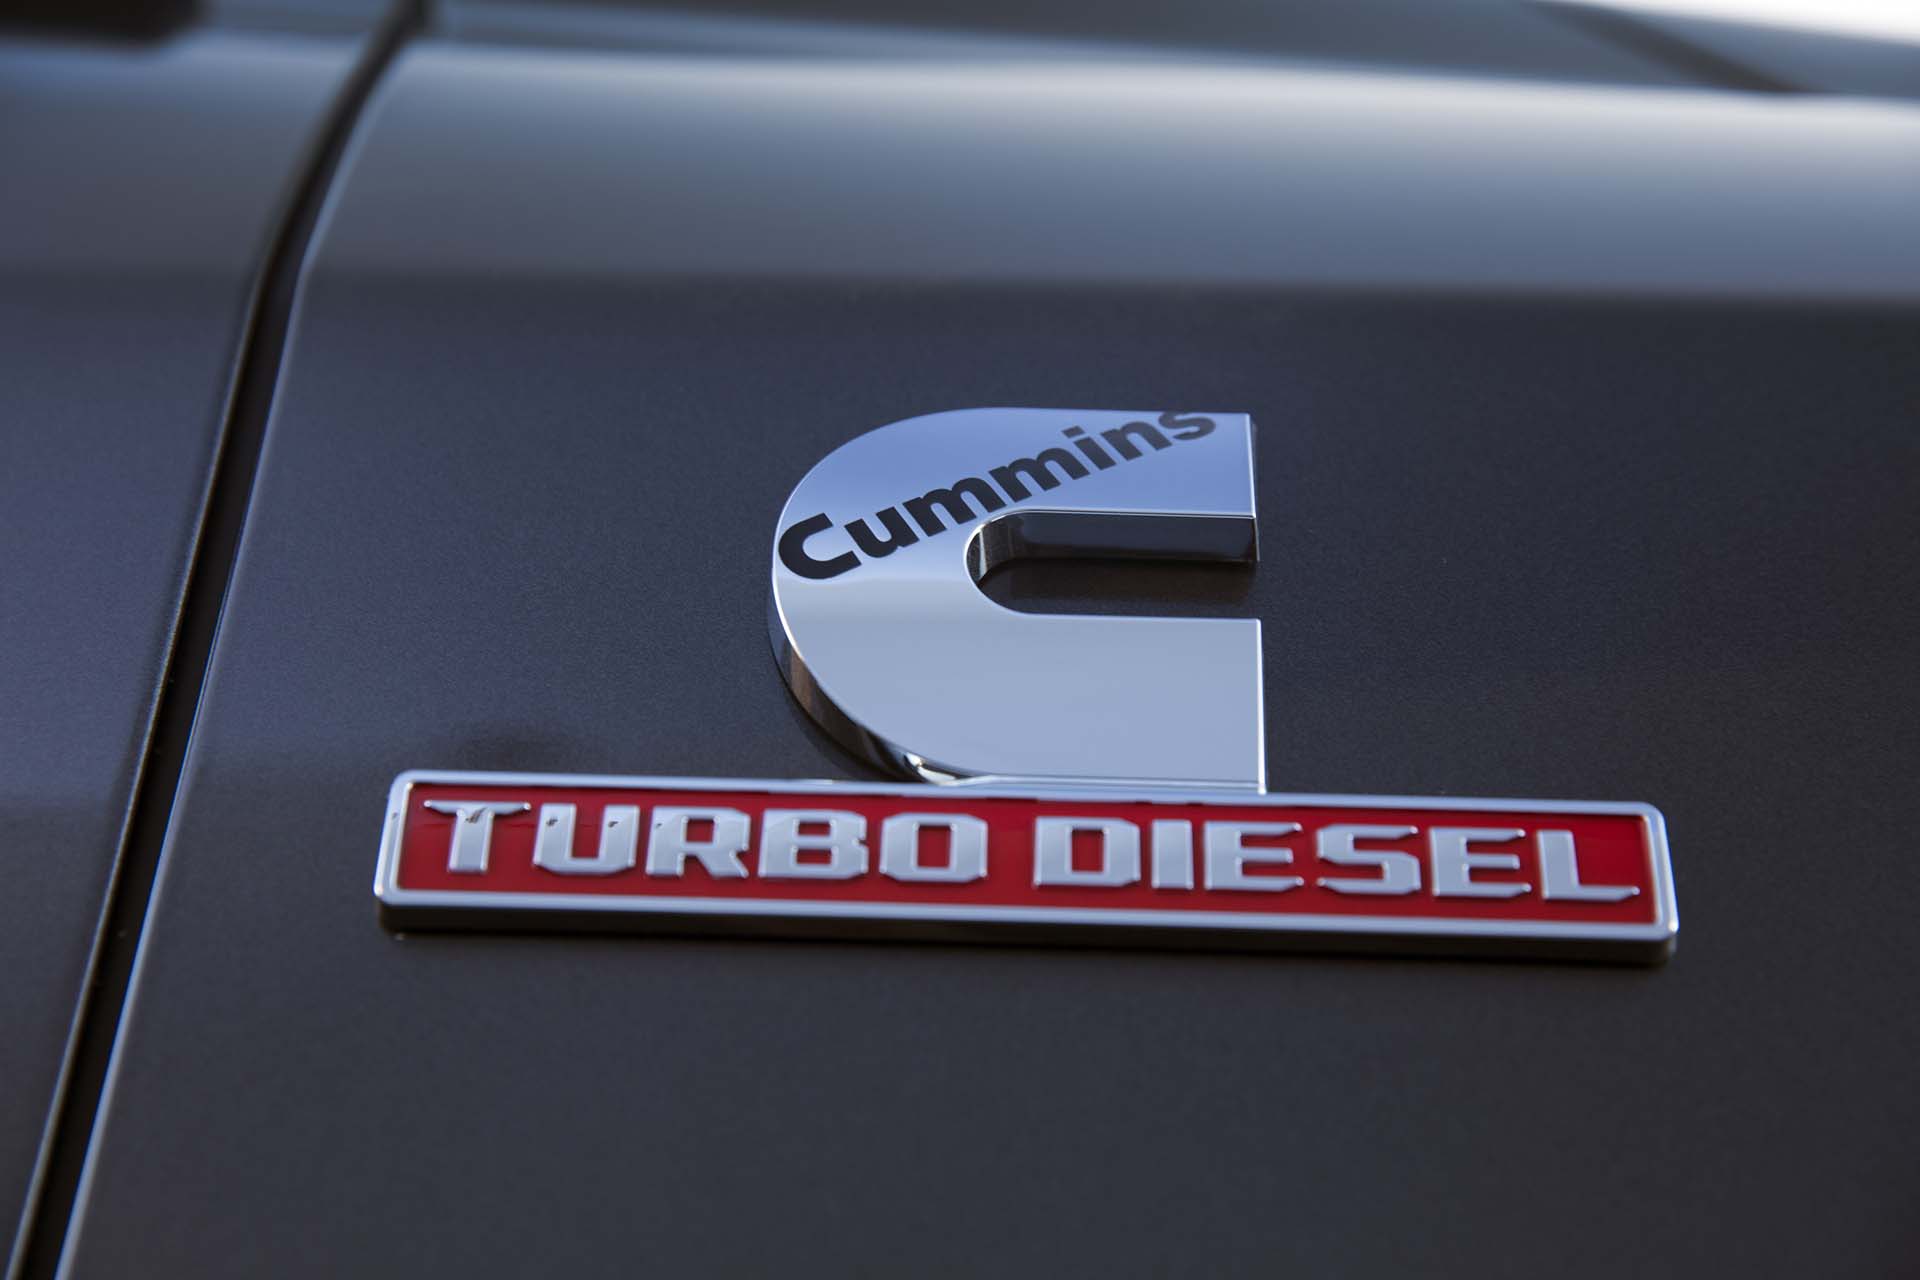 Cummins faces $1.7B fine for diesel Ram pickup emissions cheating